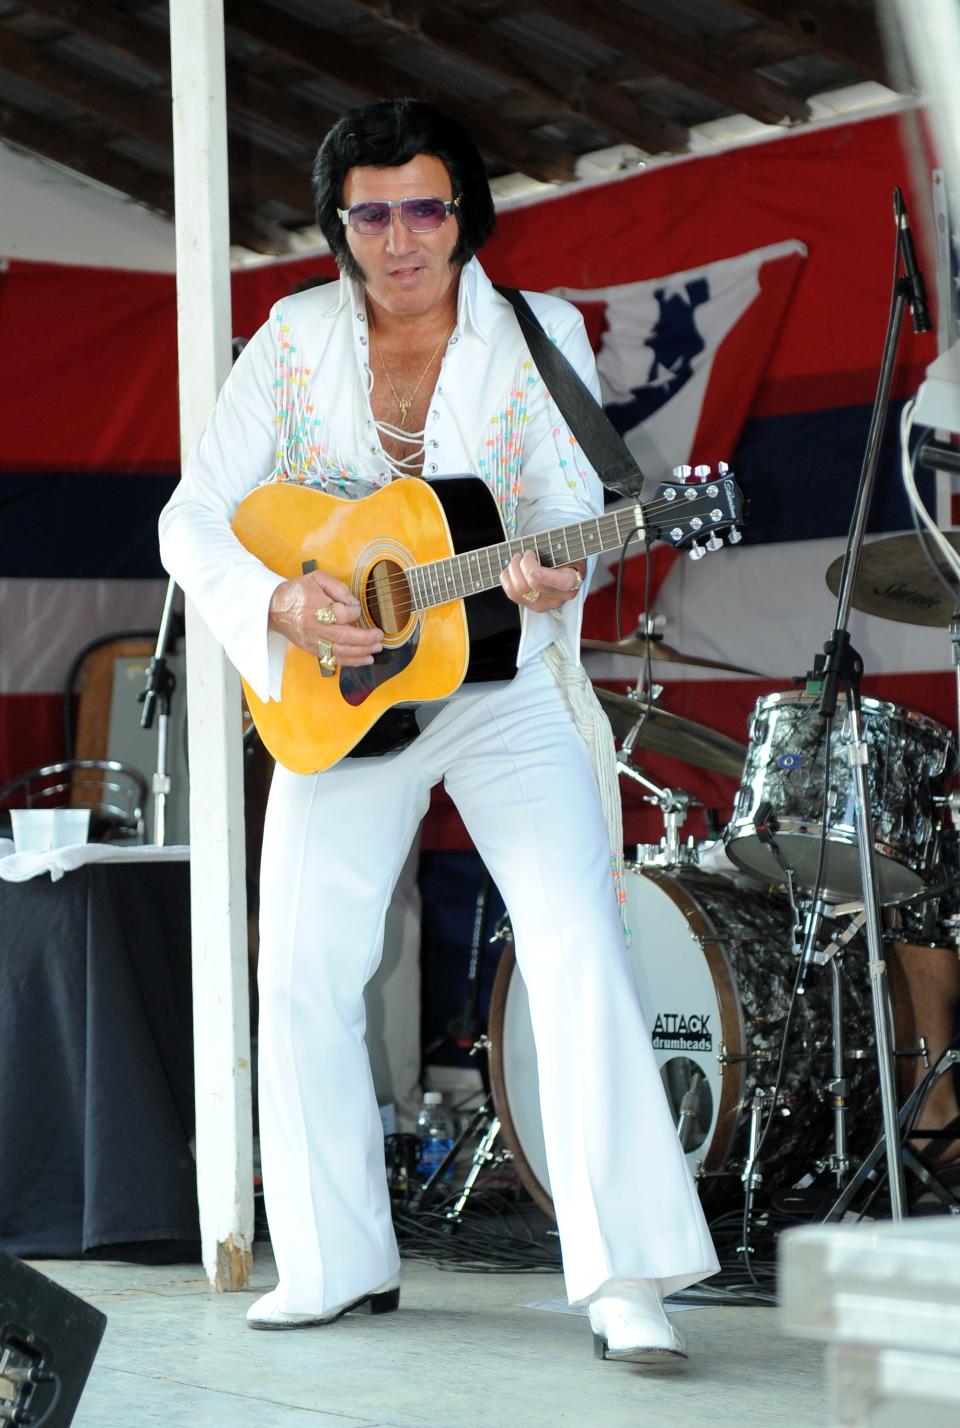 Mike Albert performs as Elvis Presley in 2011 during a concert at the Coshocton County Fairgrounds in Ohio.